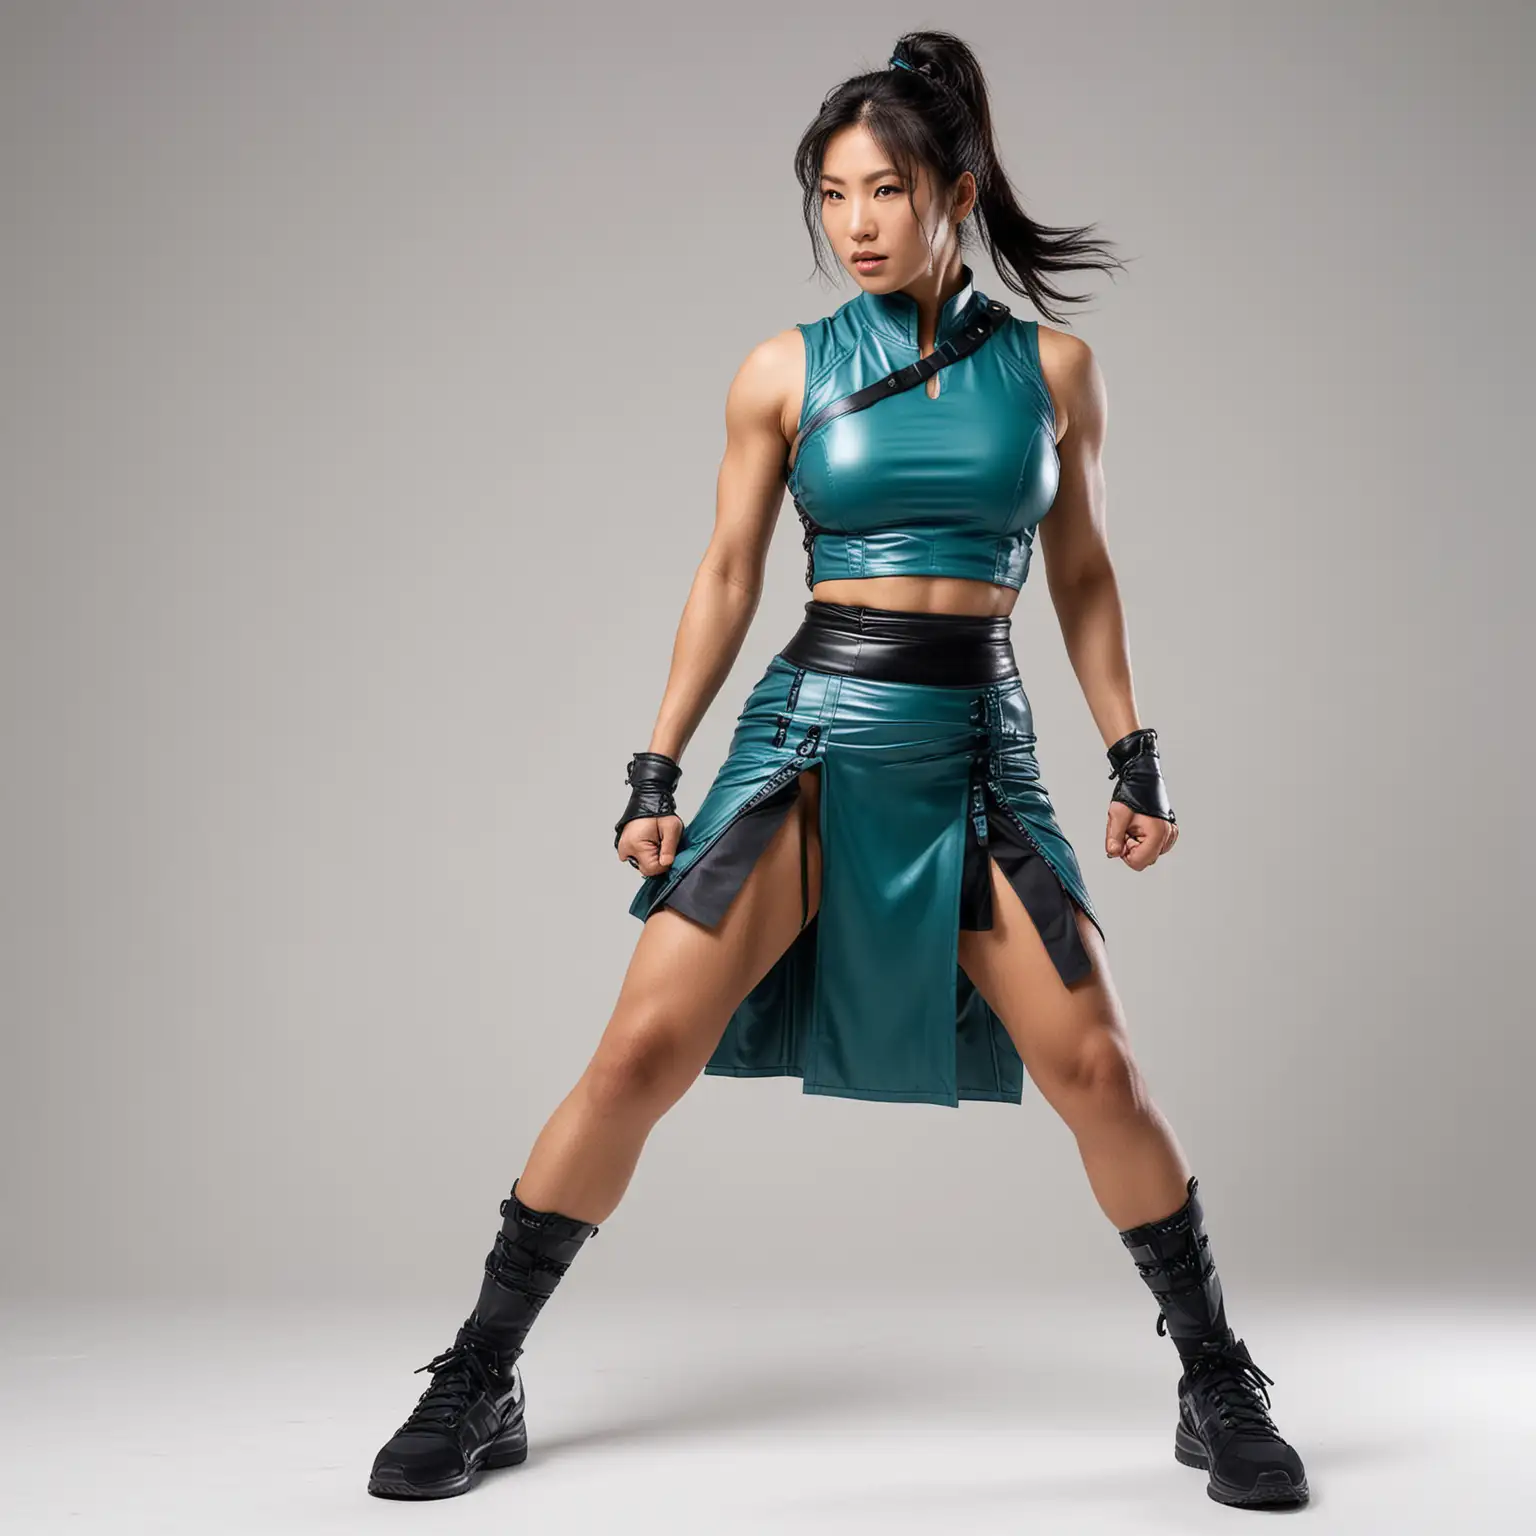 Muscular Japanese Woman in Teal ChunLi Dress on White Background